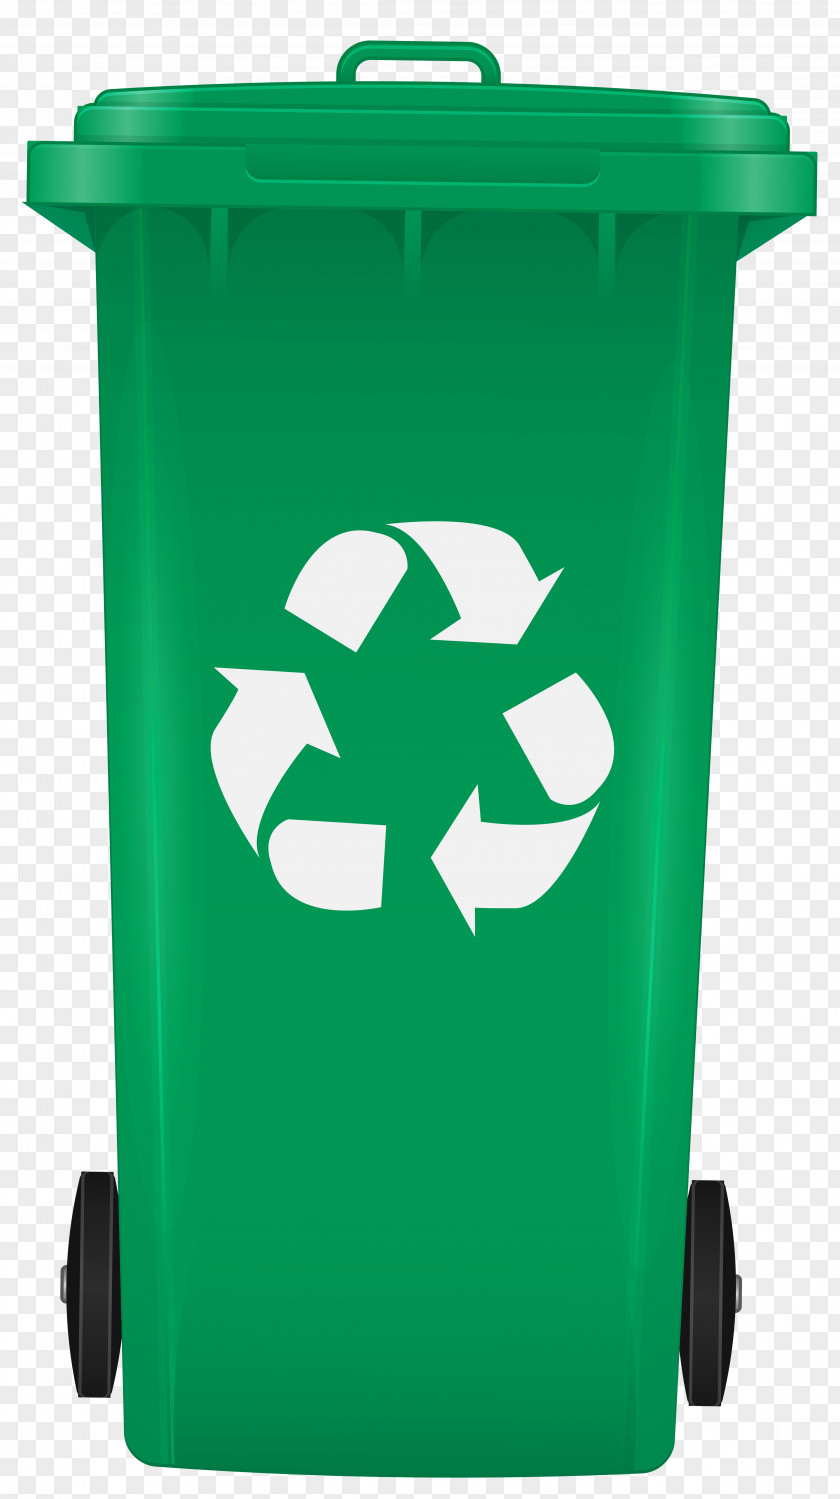 Recycle Bin Recycling Rubbish Bins & Waste Paper Baskets Collection PNG